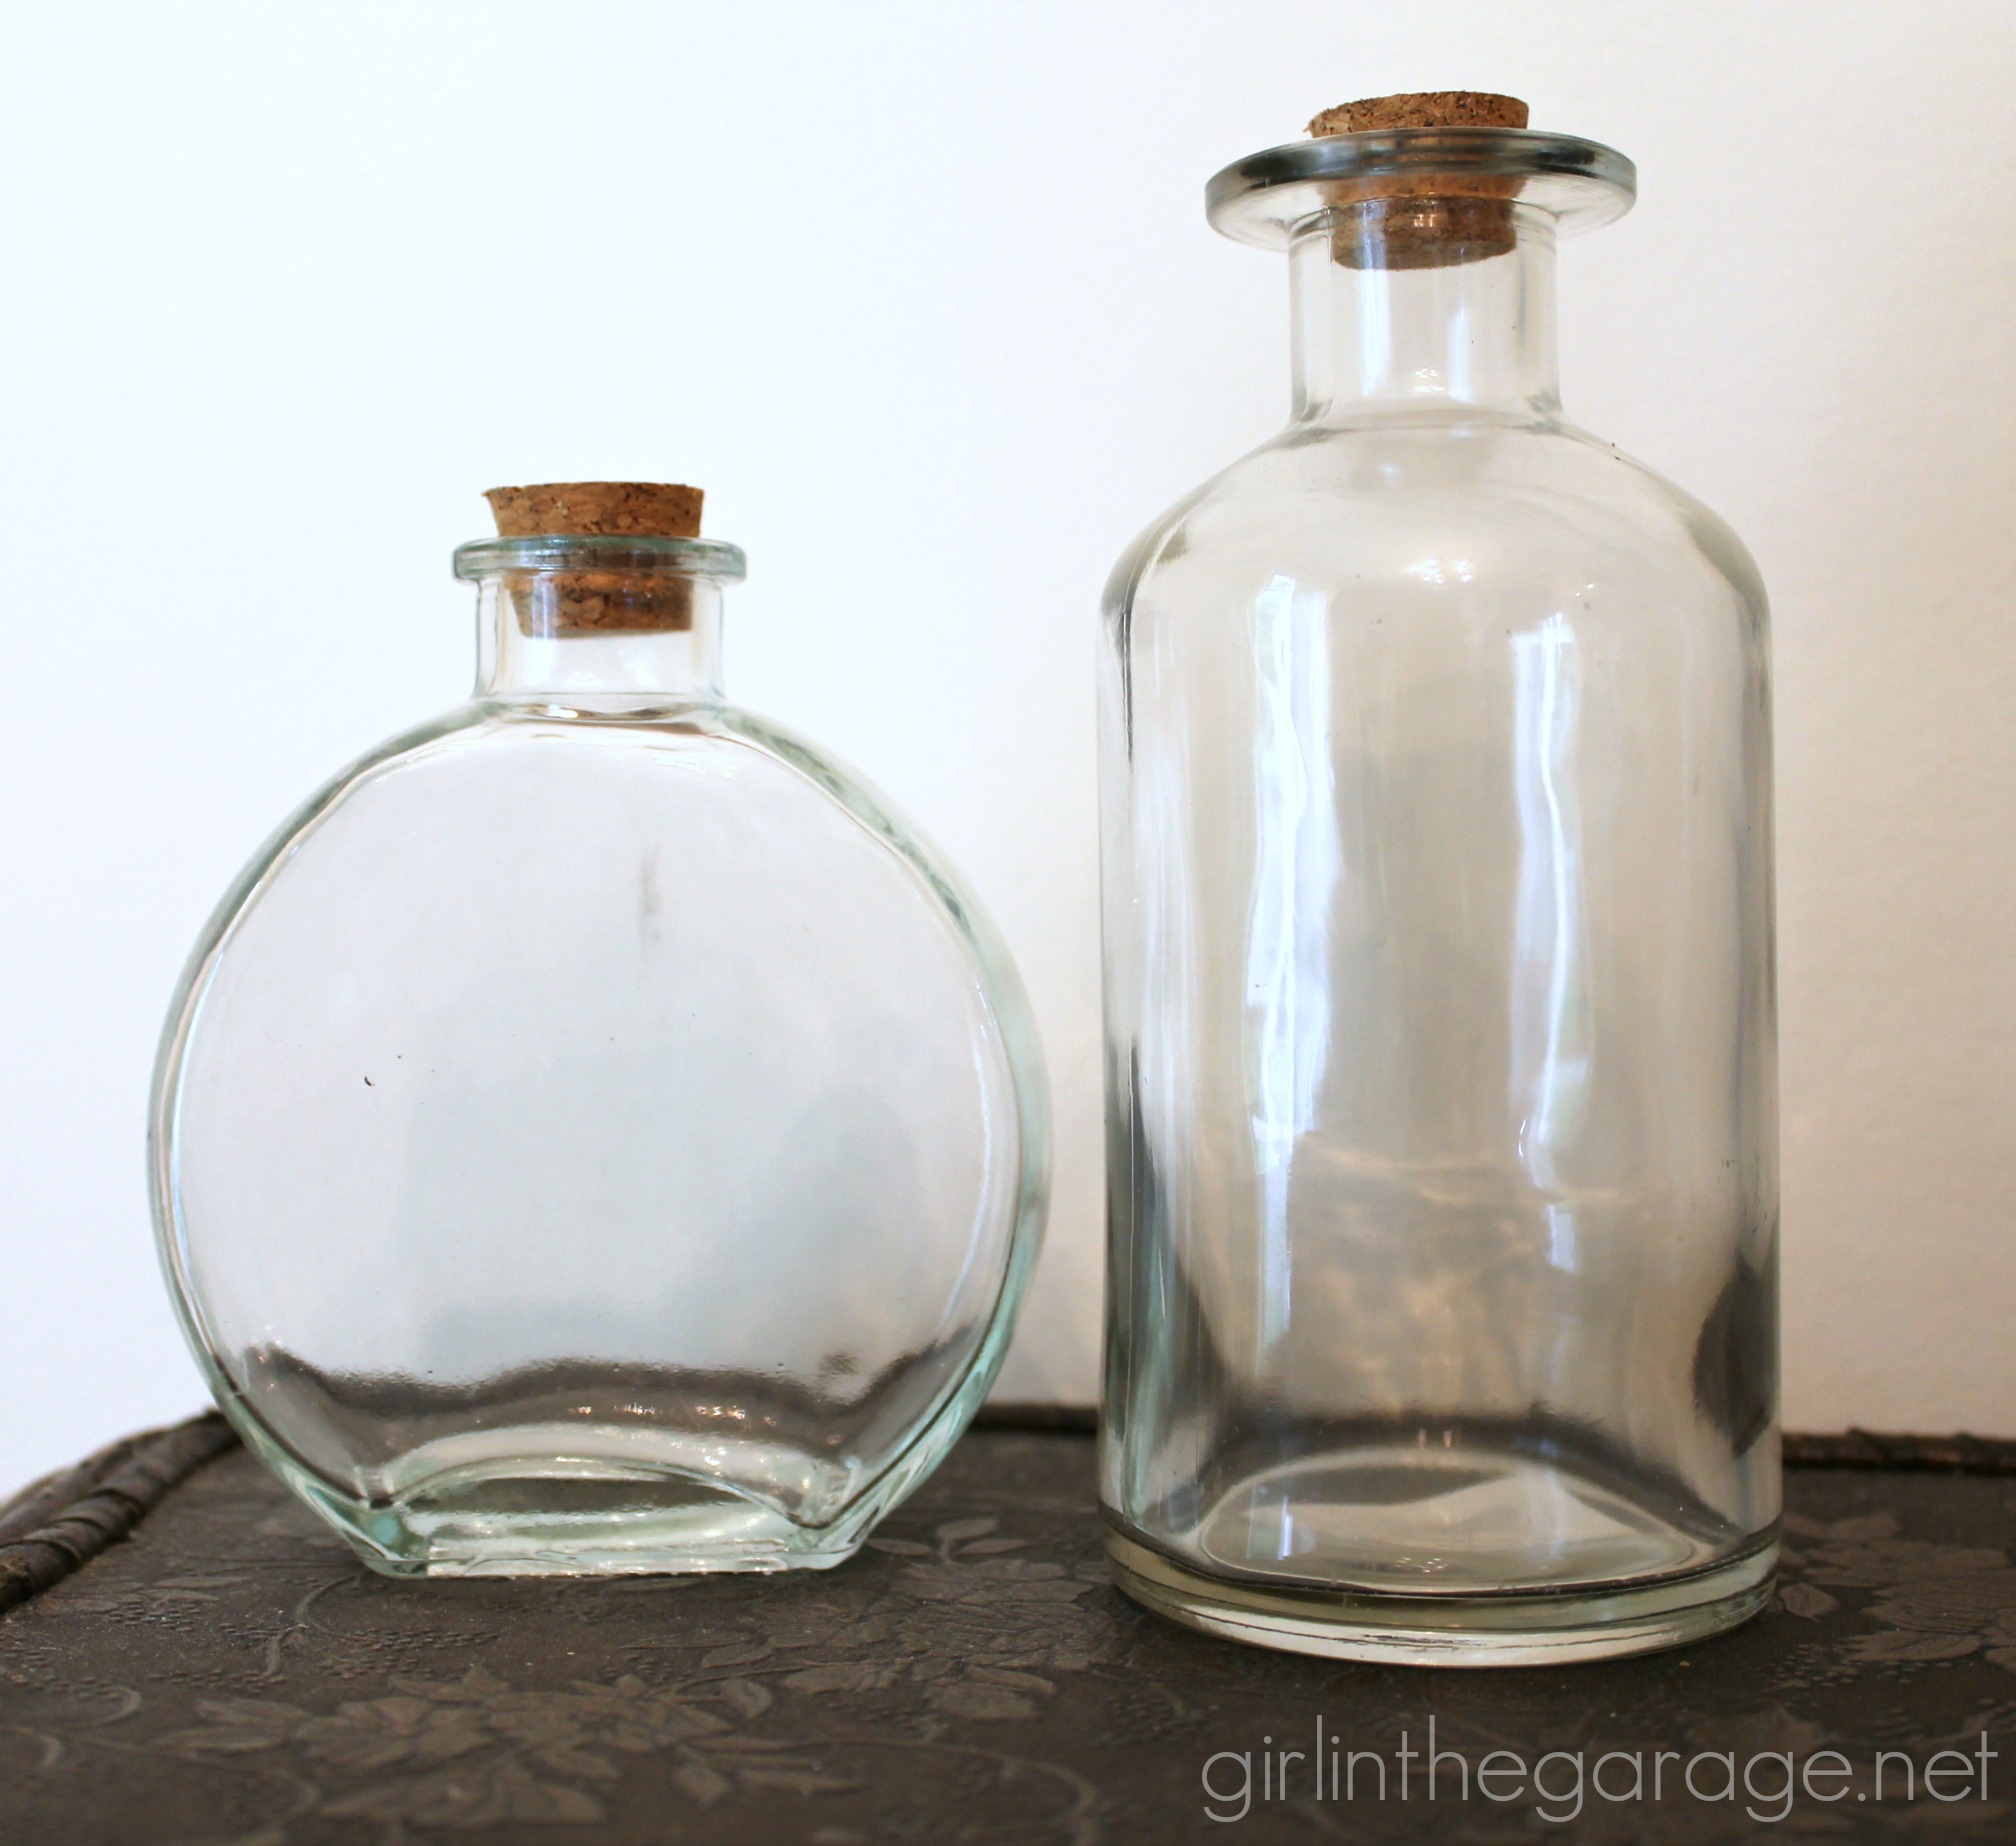 Embellished Glass Bottles with Vintage Flair | Girl in the Garage®